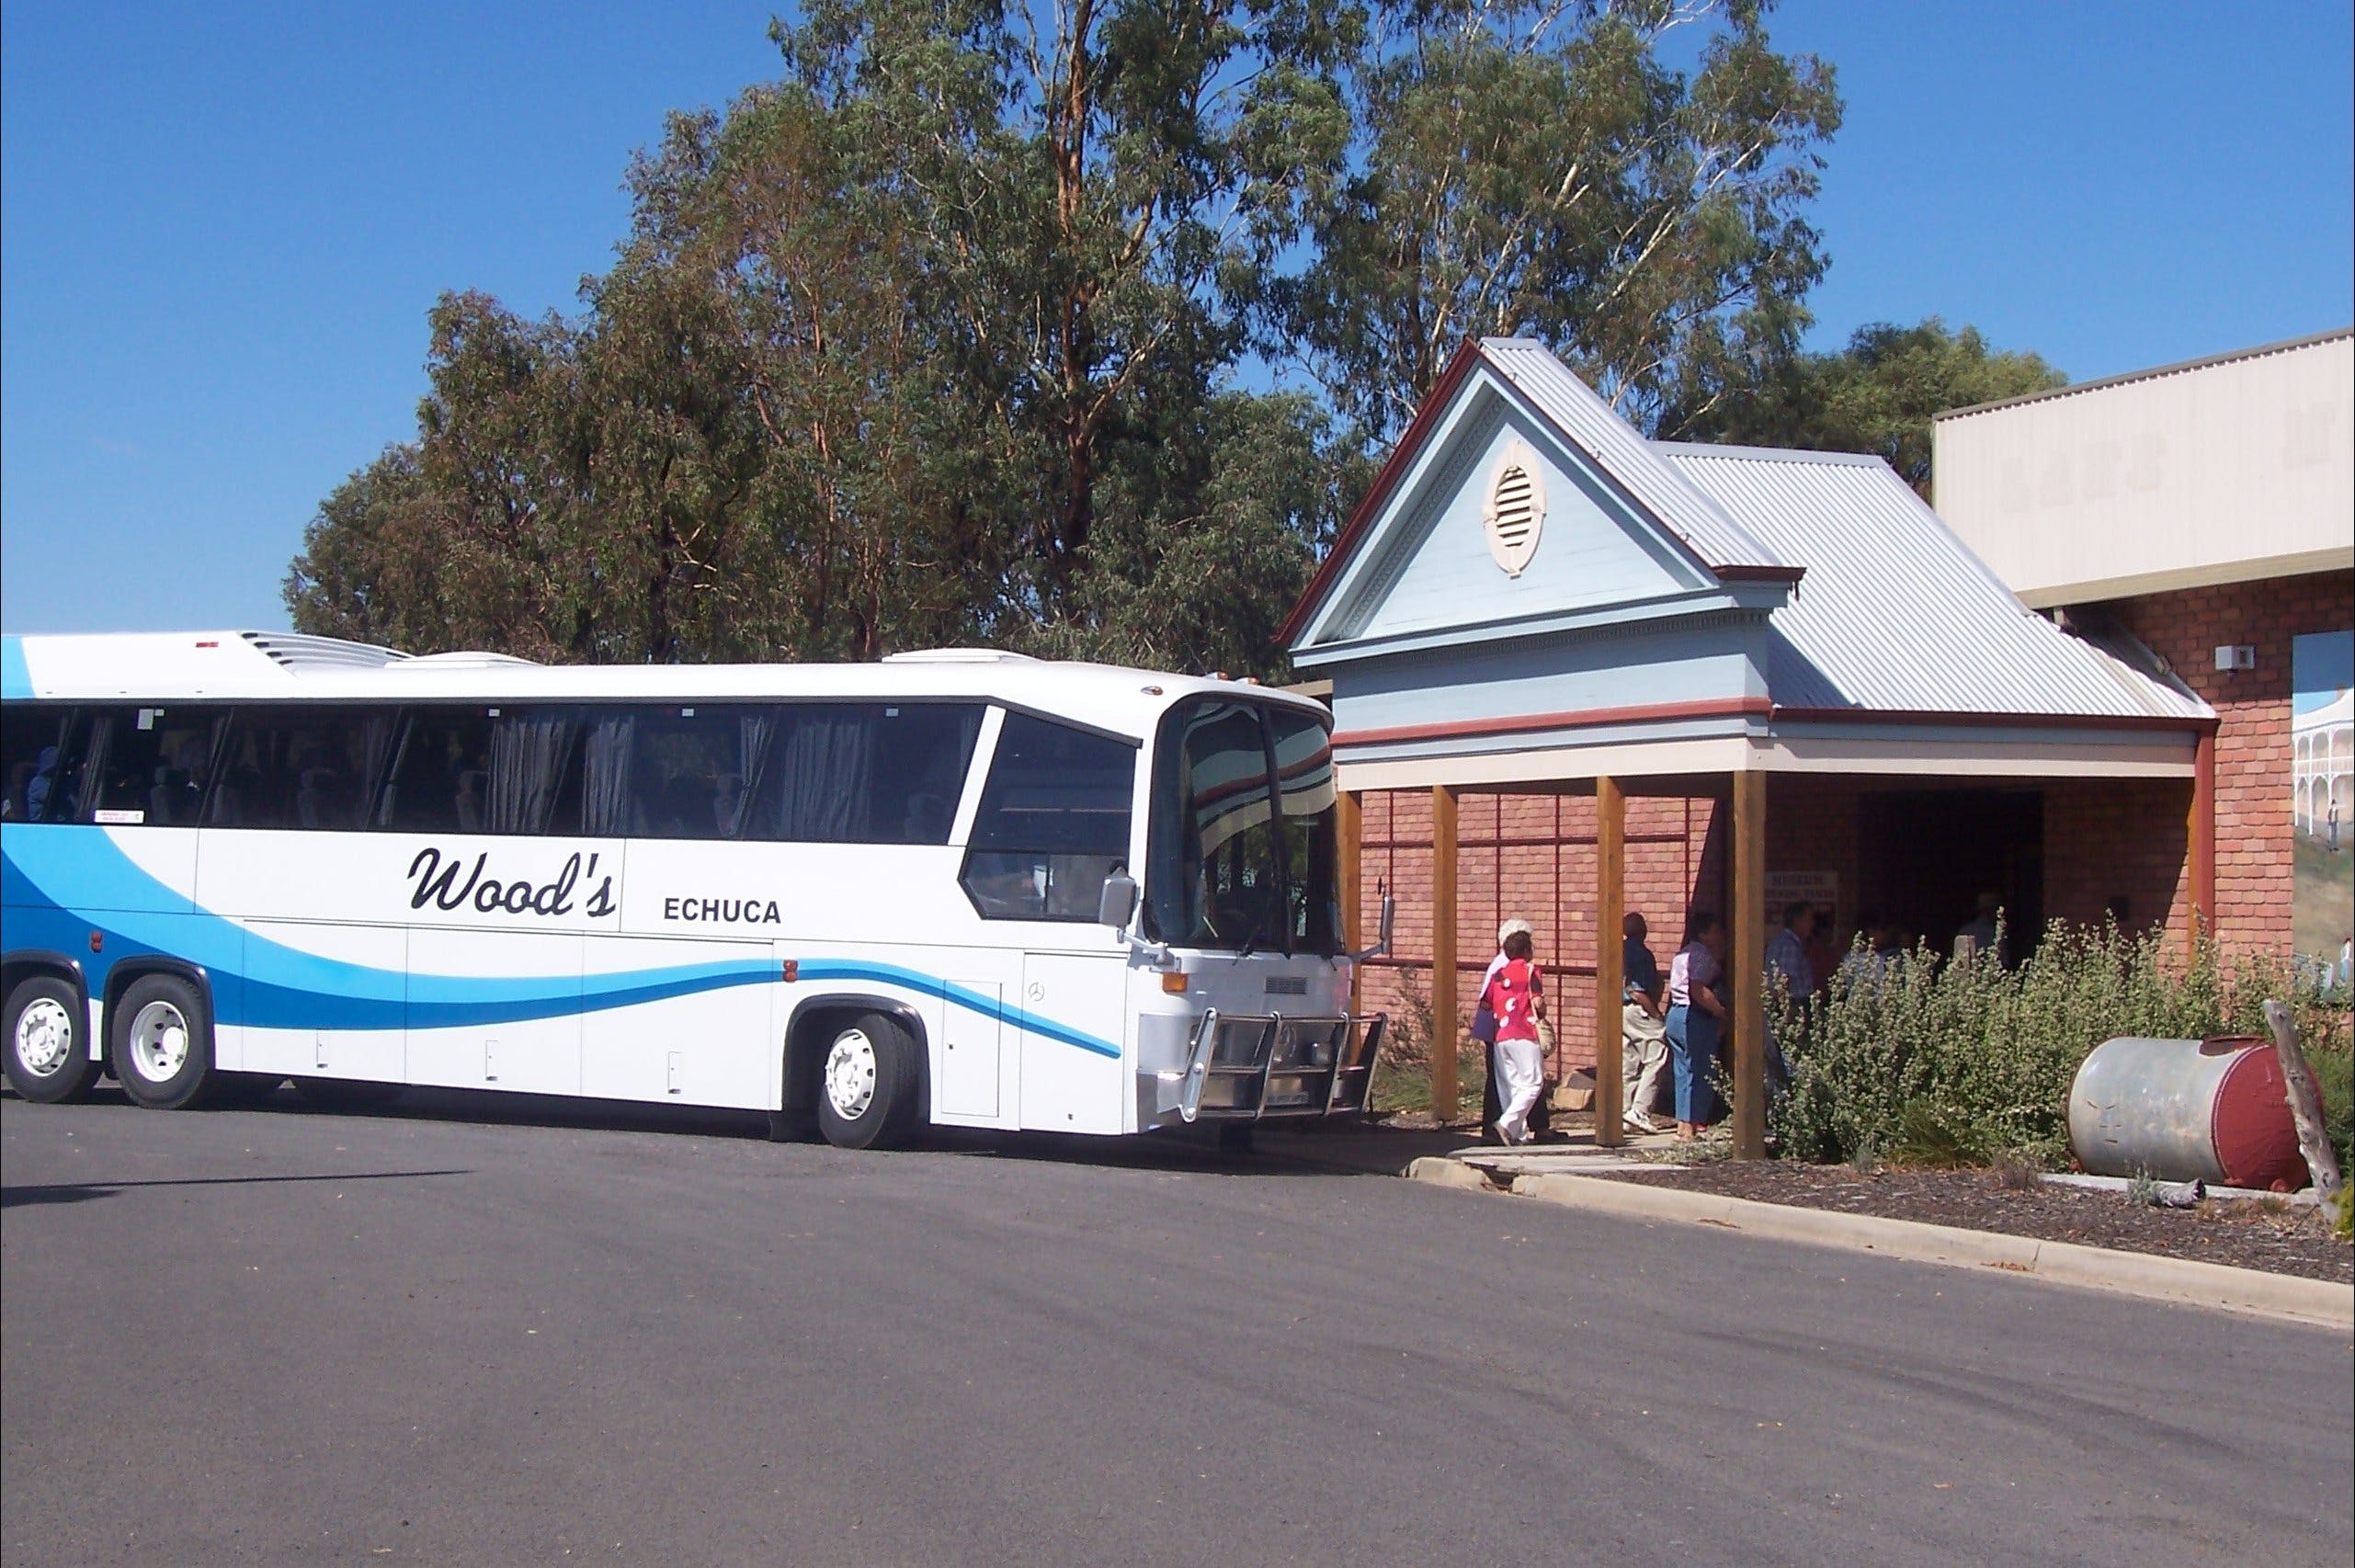 Yarrawonga-Mulwala Pioneer Museum - Find Attractions